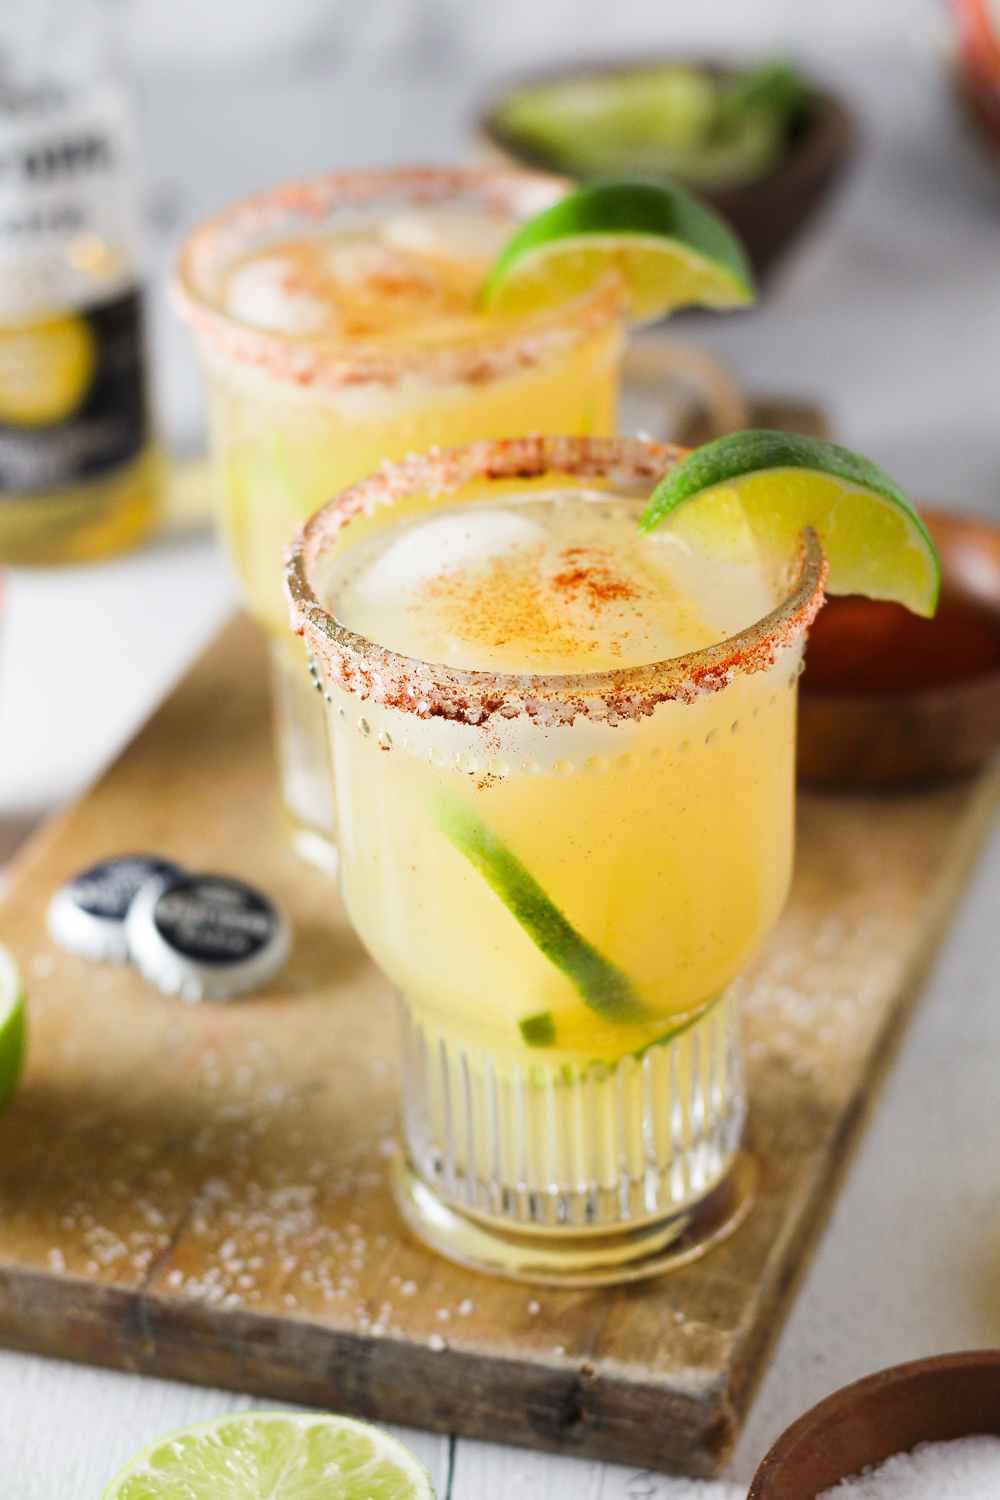 Crisp and refreshing margarita that is perfectly balanced with fresh lemon and lime juice, natural sweetener and tequila then topped off with Corona Extra and served in a glass with a chili-lime salt rim.